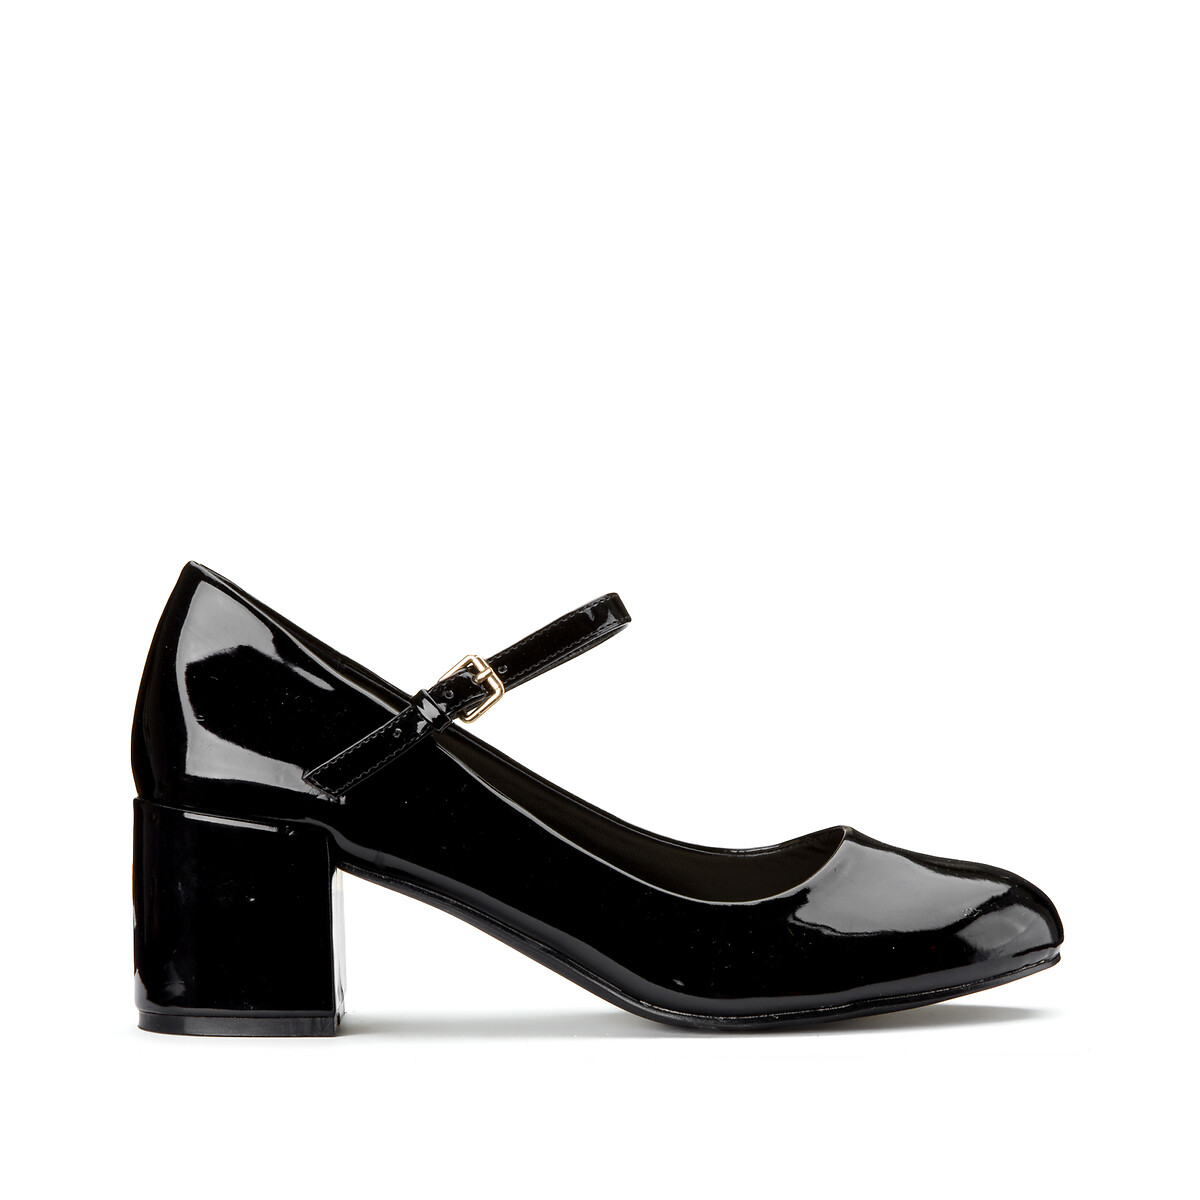 Hennessy Black Patent Mary Jane Heels by Verali | Shop Online at Styletread